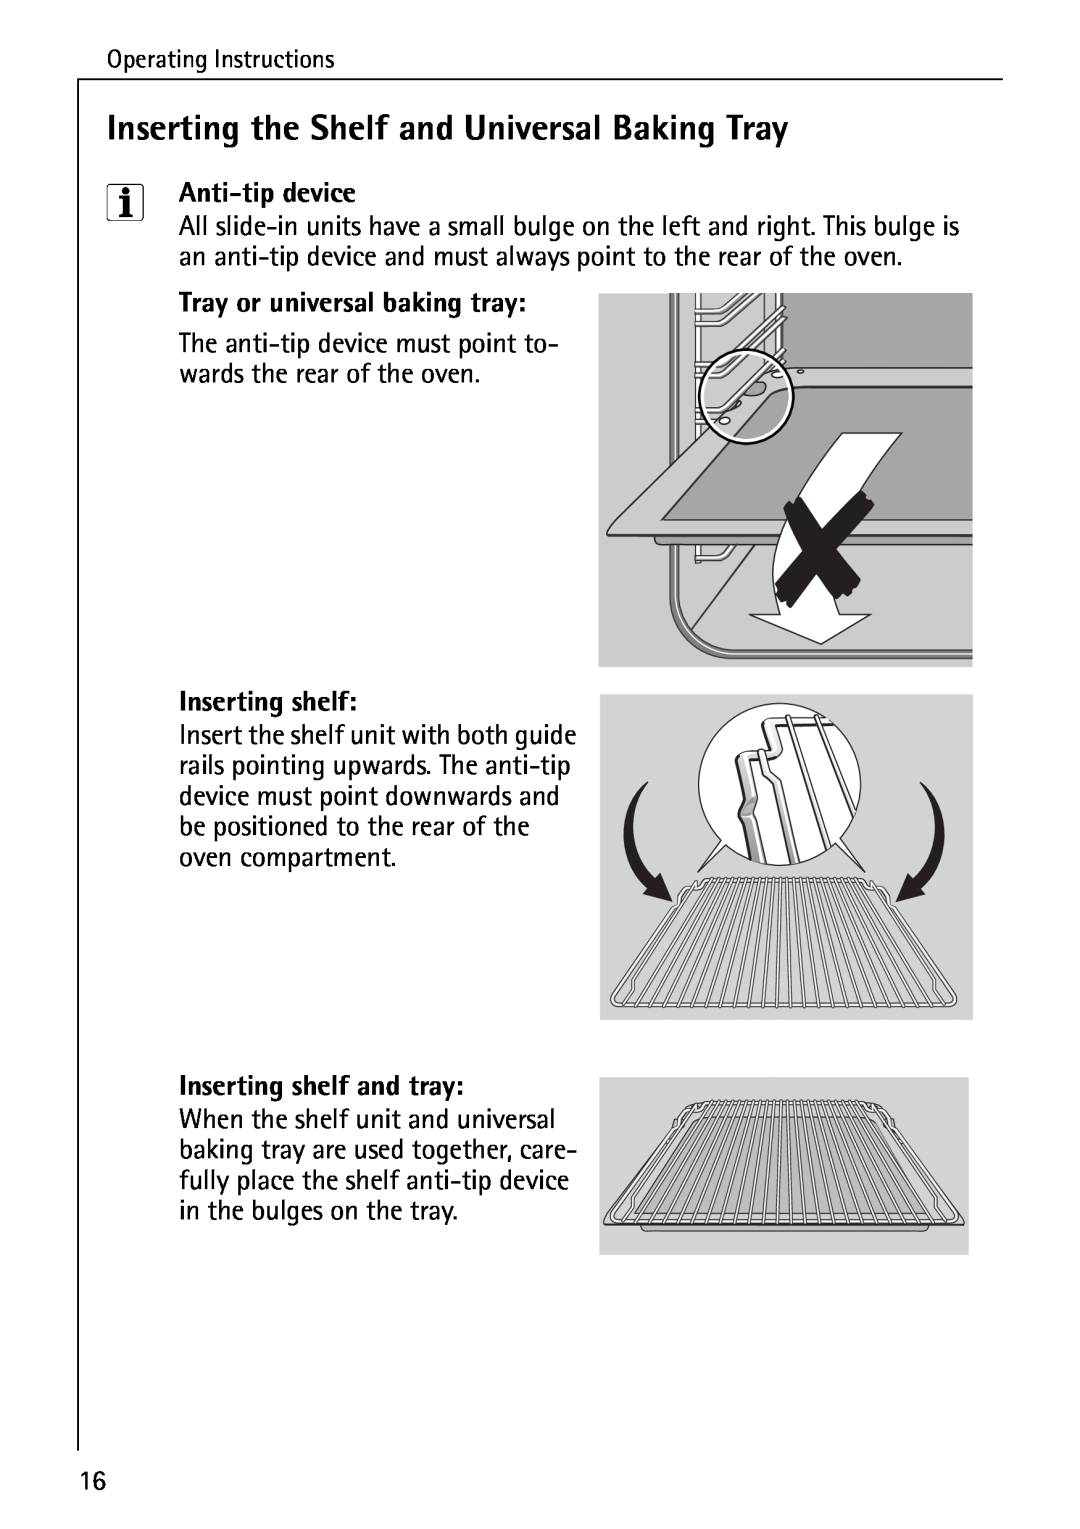 Electrolux B4140-1 manual Inserting the Shelf and Universal Baking Tray, Anti-tip device, Tray or universal baking tray 